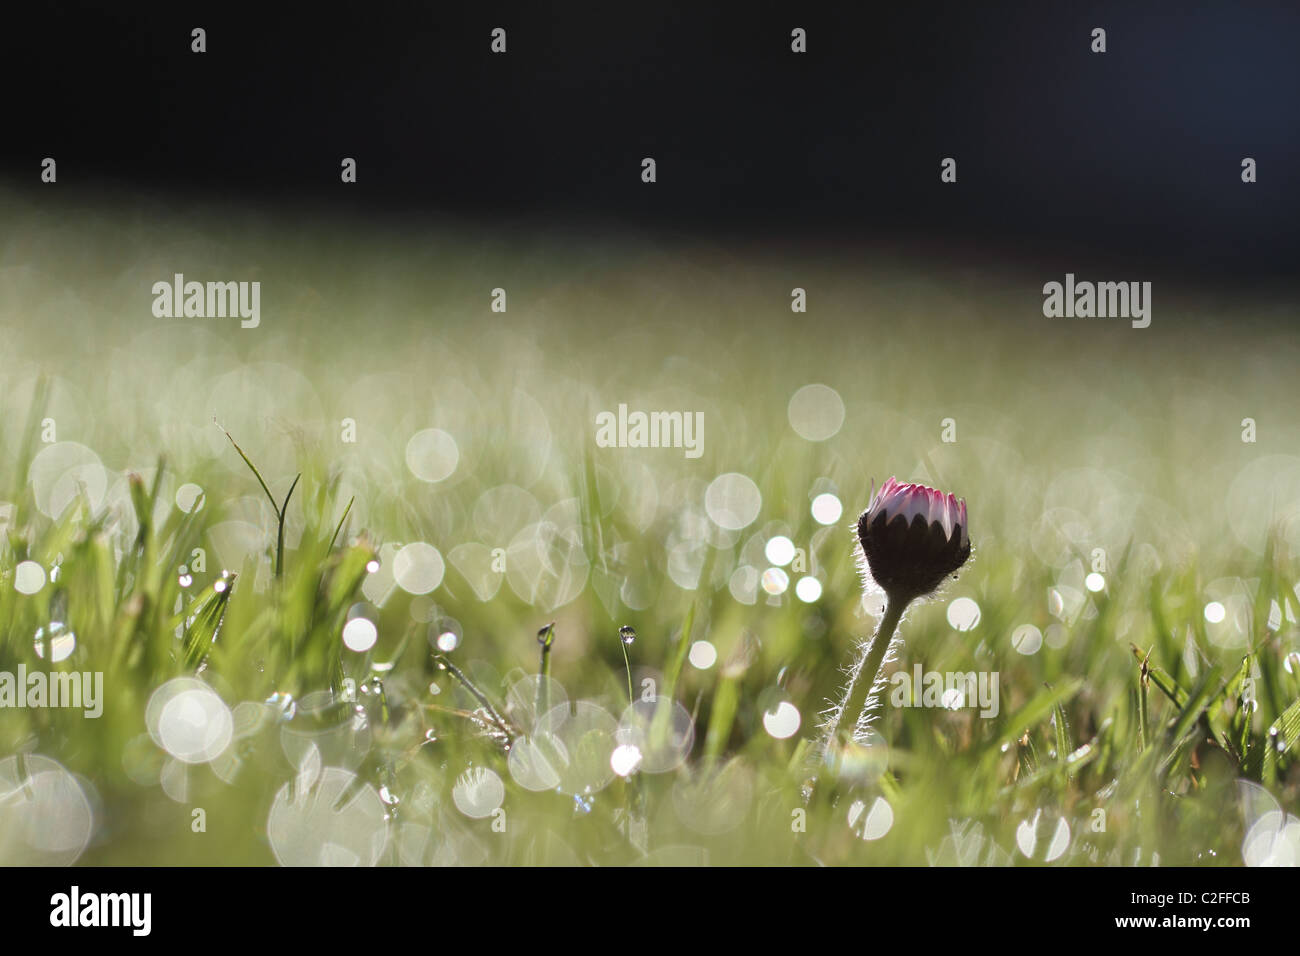 Image of a flowering daisy in the morning with droplets of dew Stock Photo